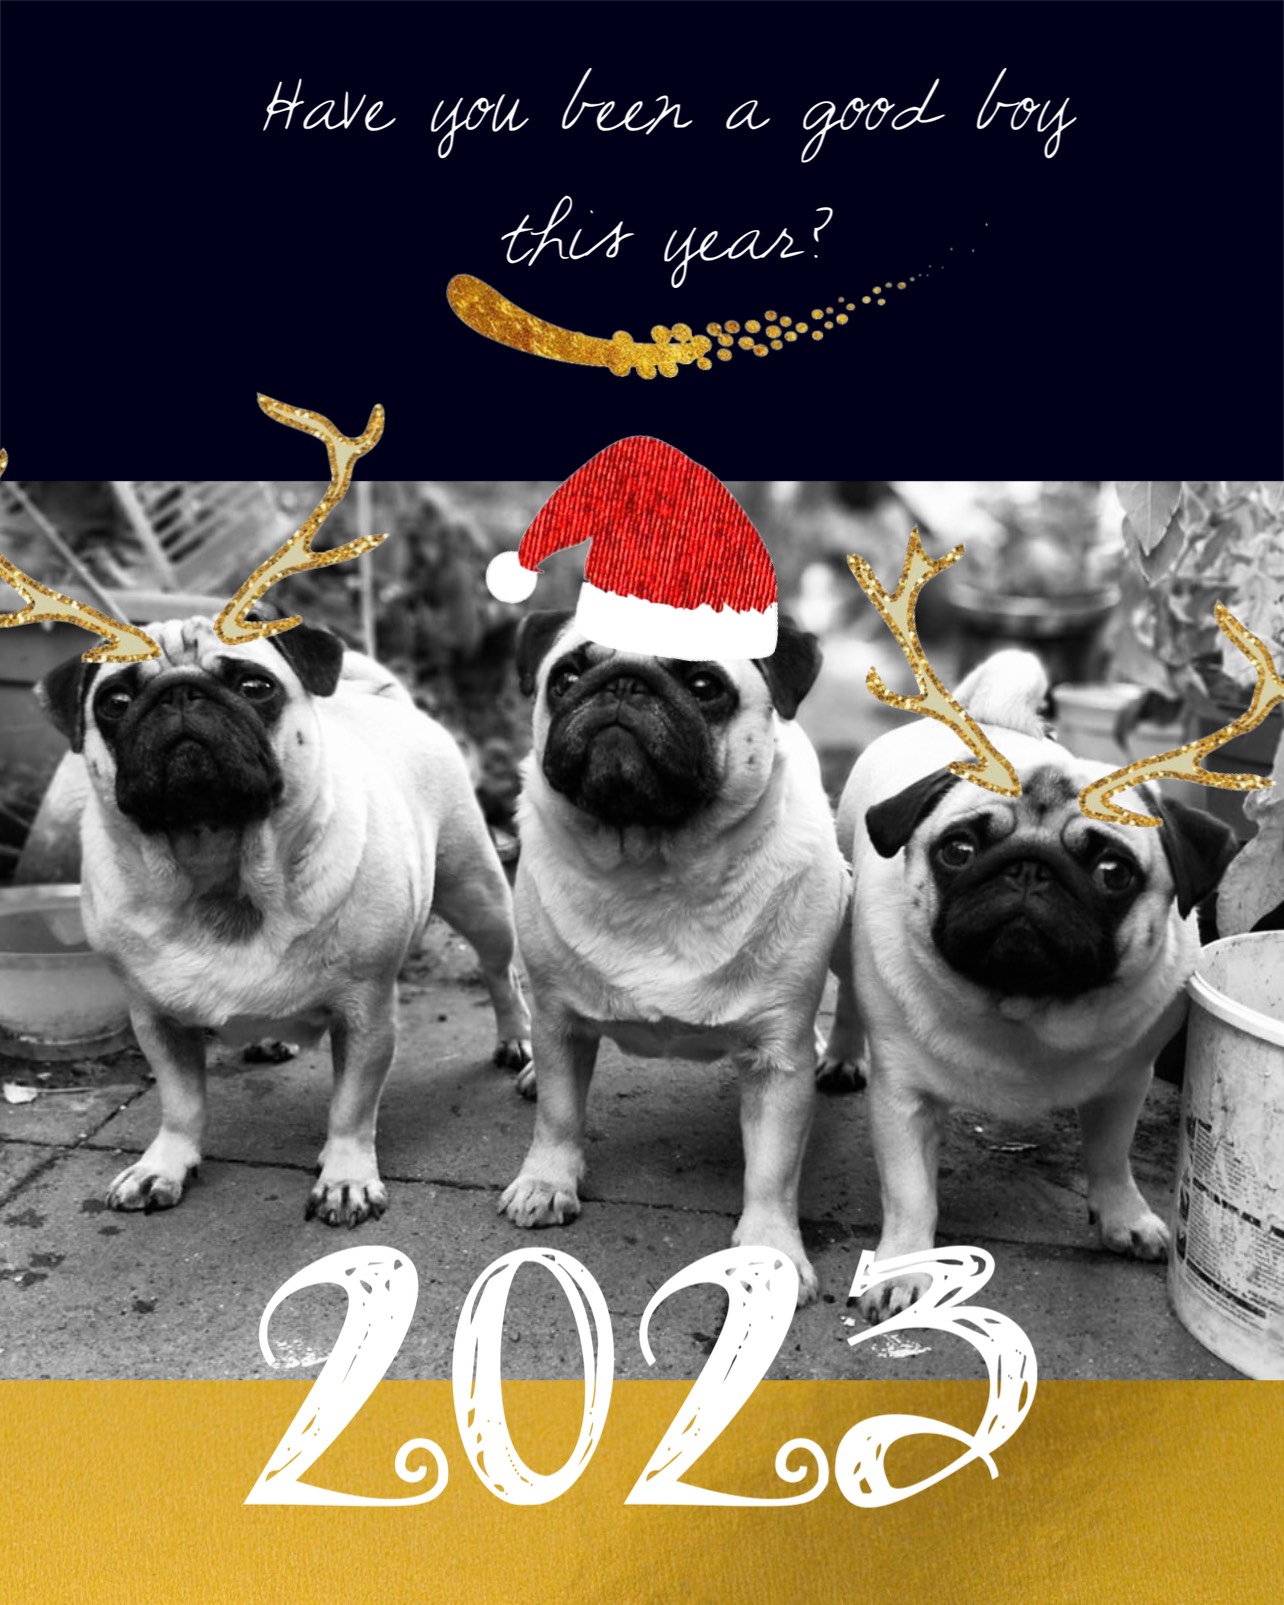 A Group Of Pug Dogs Wearing Christmas Hats Merry Christmas Template